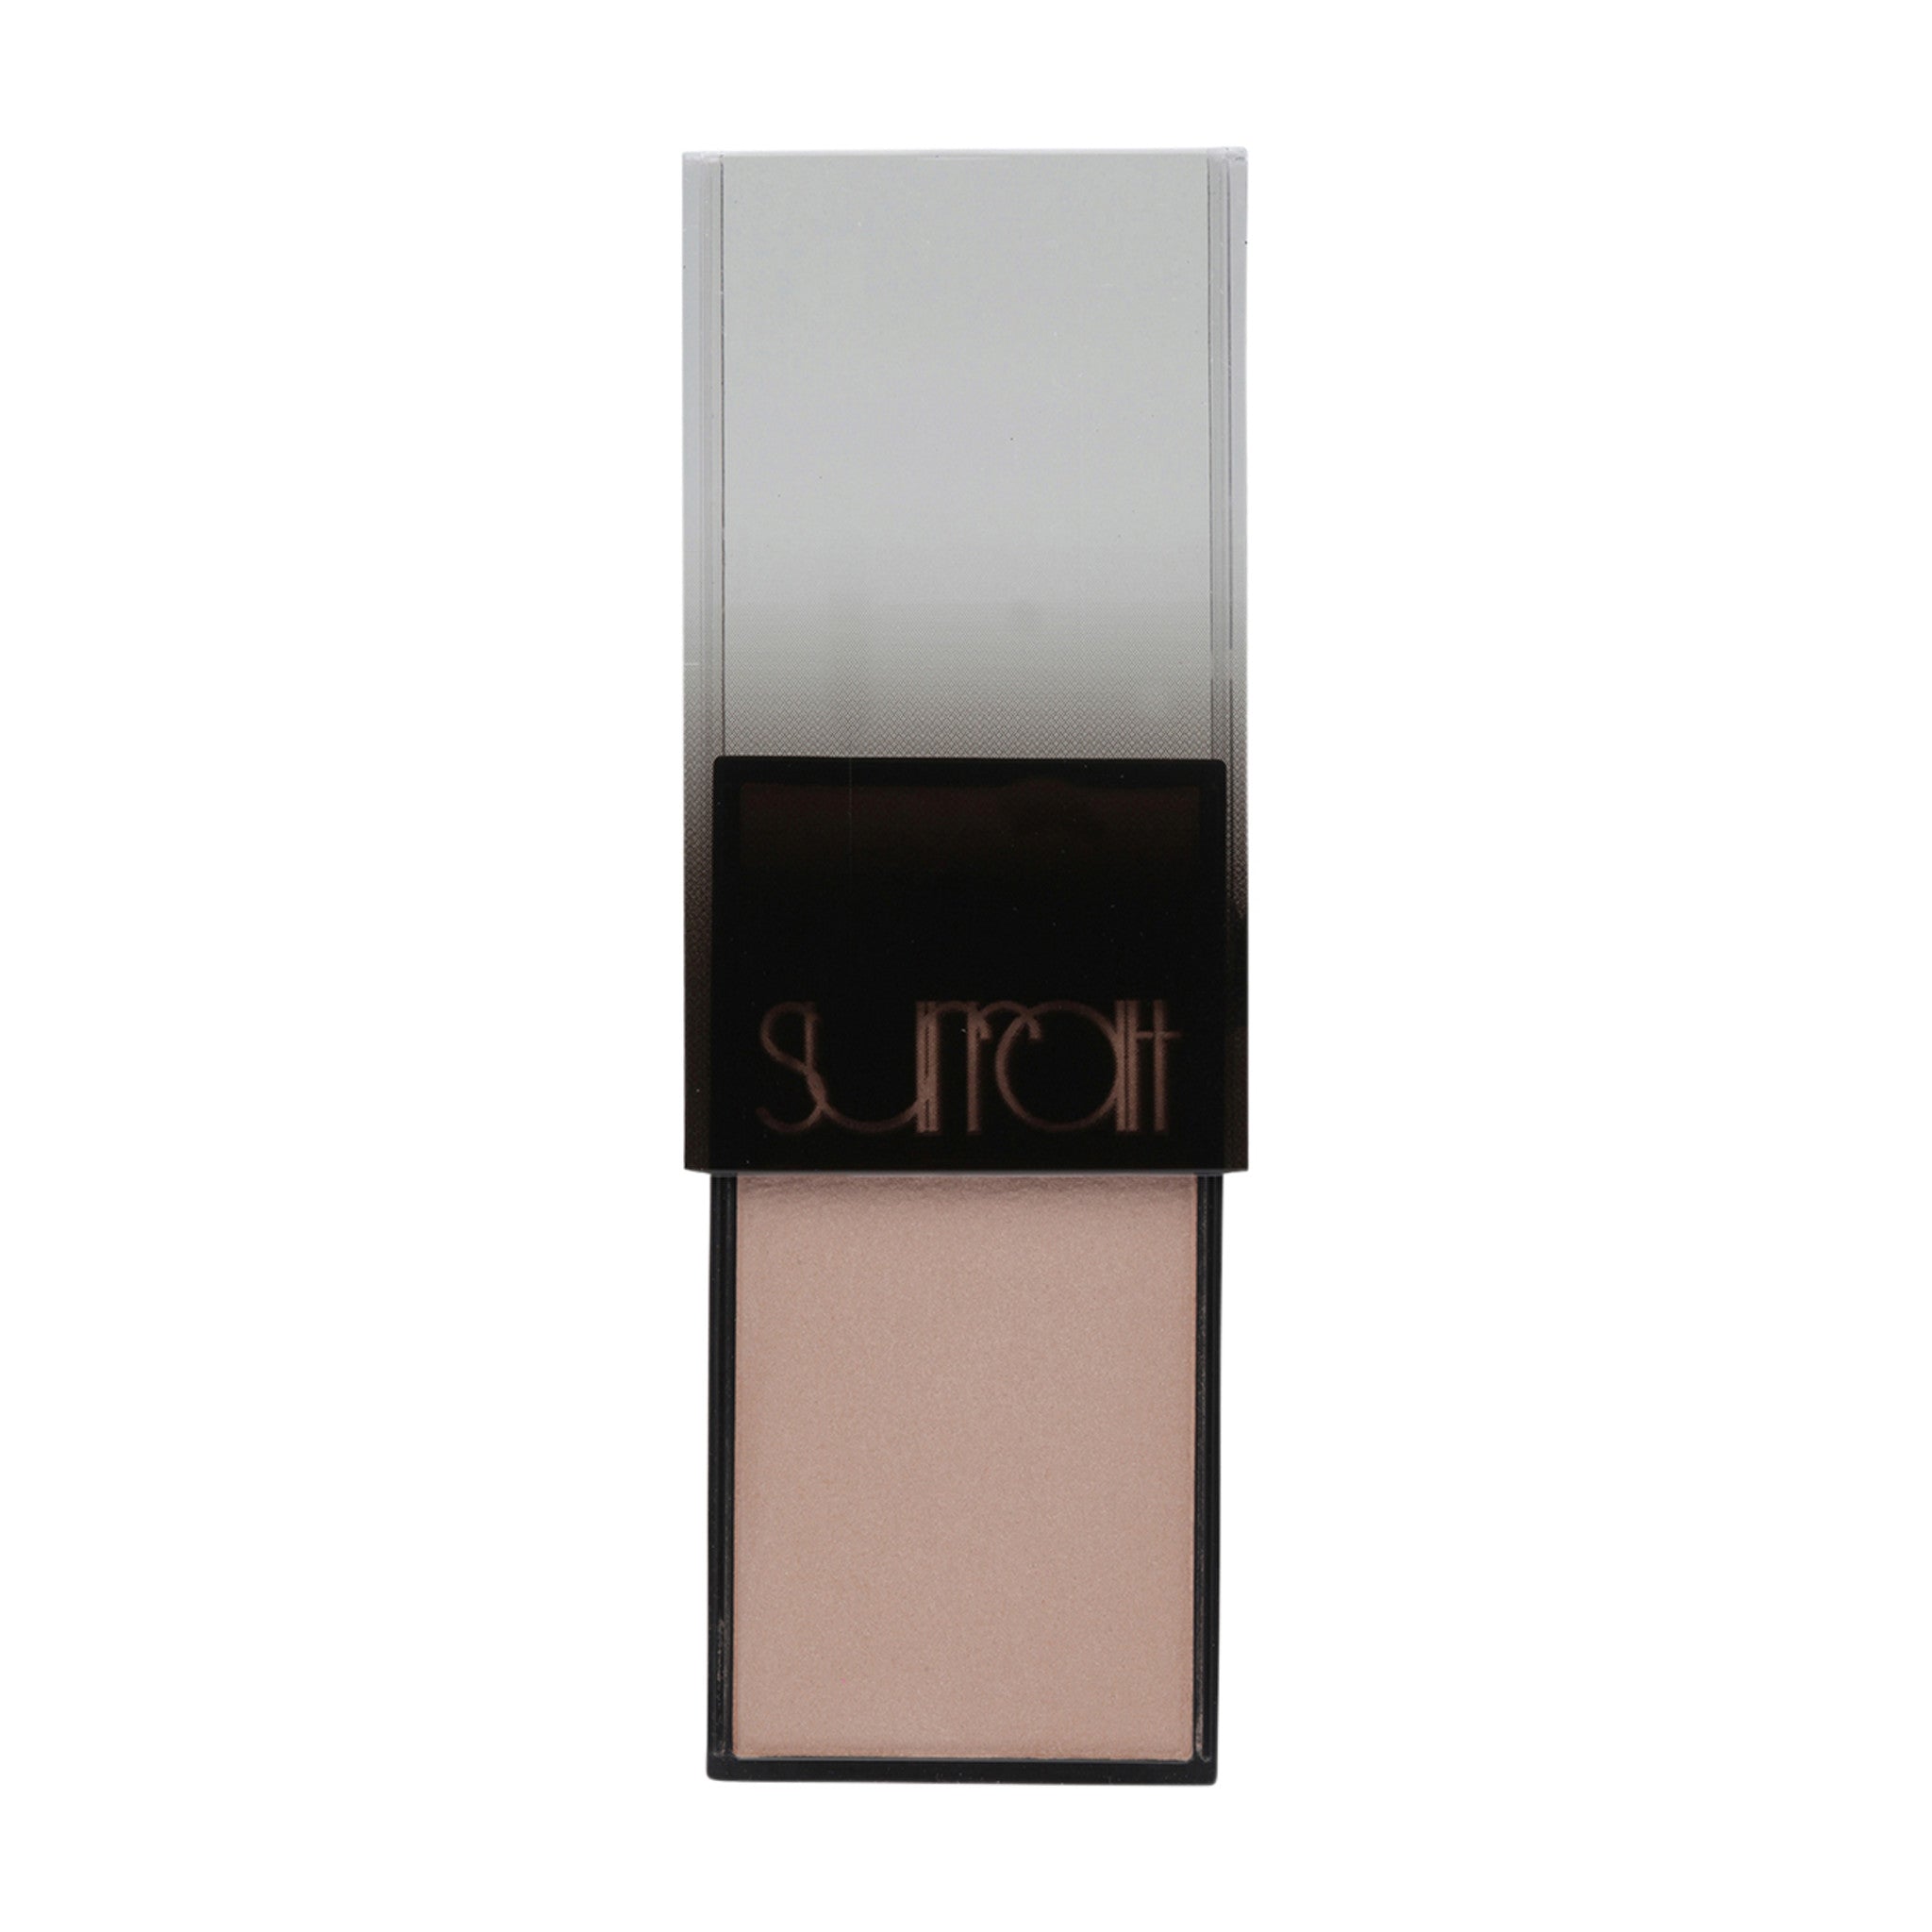 Surratt Artistique Blush Color/Shade variant: Grisaille (Contour) main image. This product is in the color nude